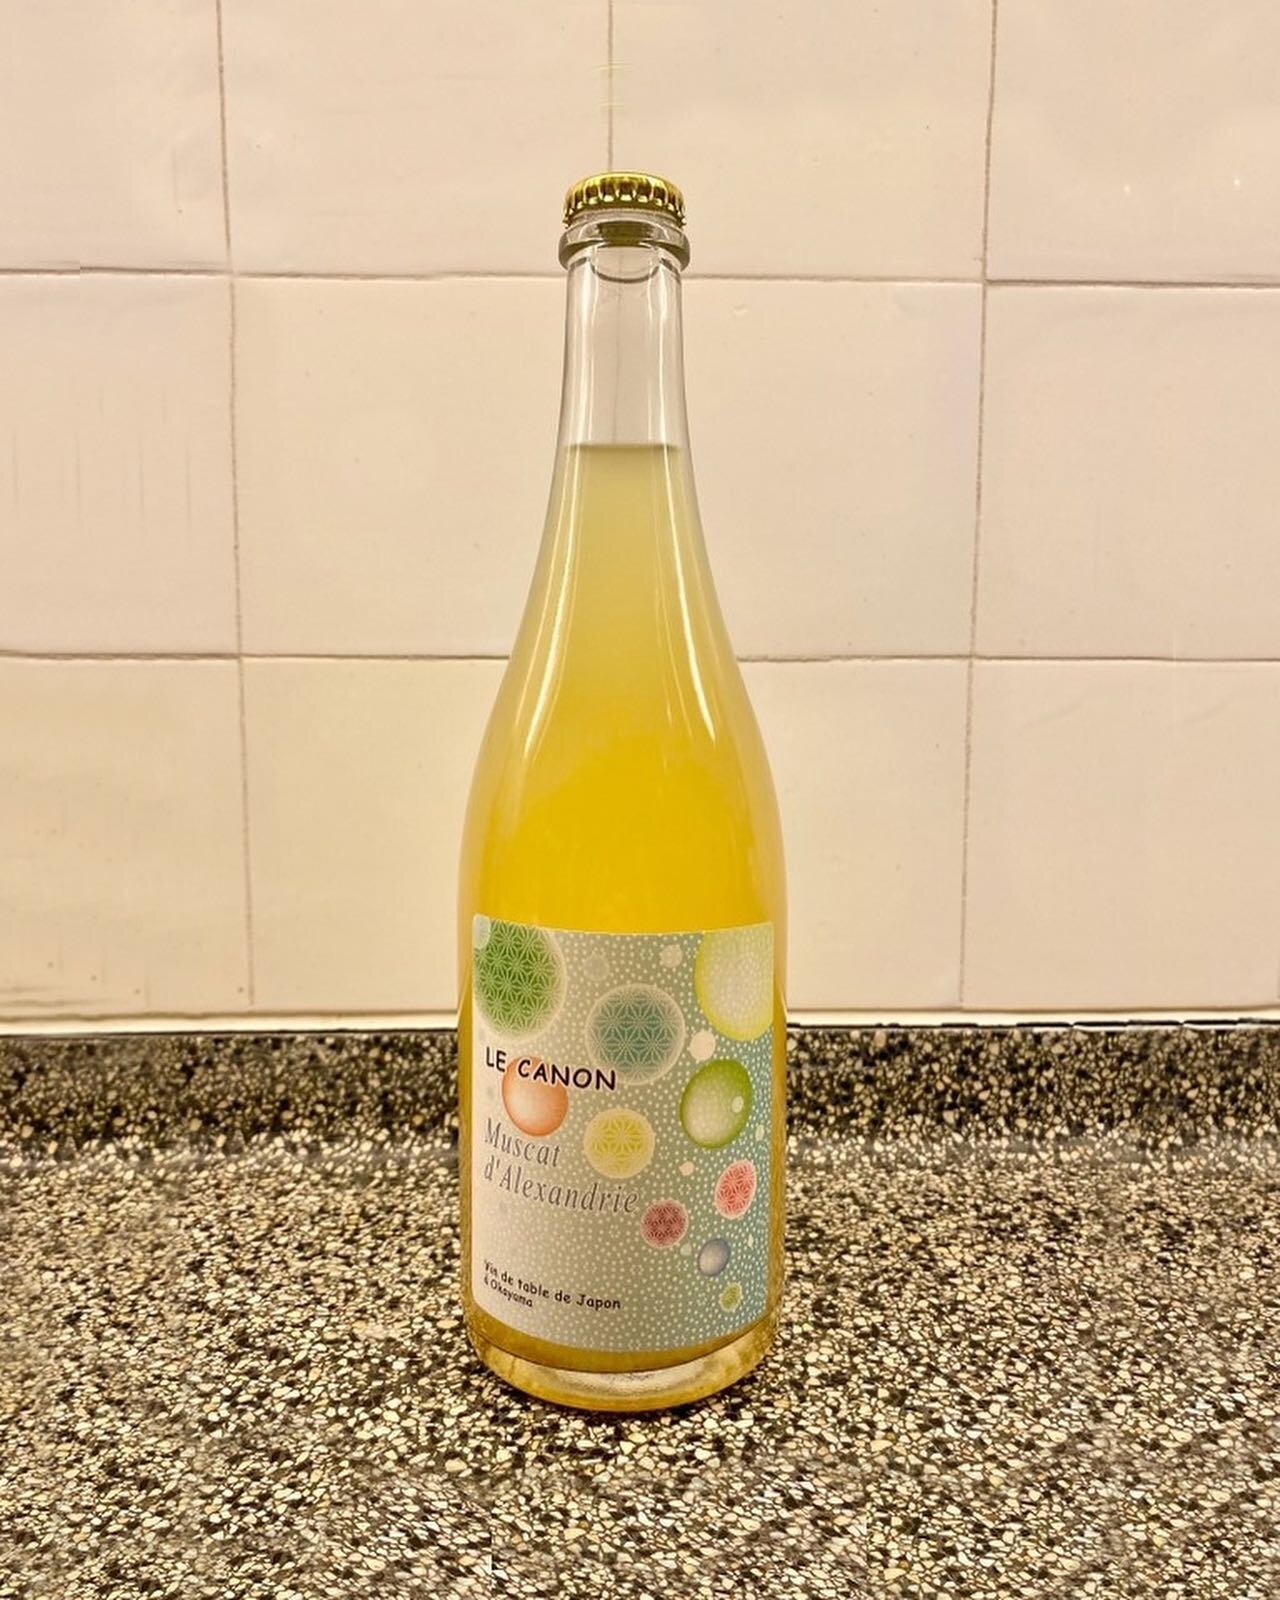 Muscat d'Alexandrie - Le Canon. This Japanese pet-nat is pure fermented pineapple juice. A legendary Muscat from winemaker Hirotake Ōoka, we were spoiled to be the first in the Netherlands to pop a bottle. Any left, @cheninchenin.ams? In any case, th